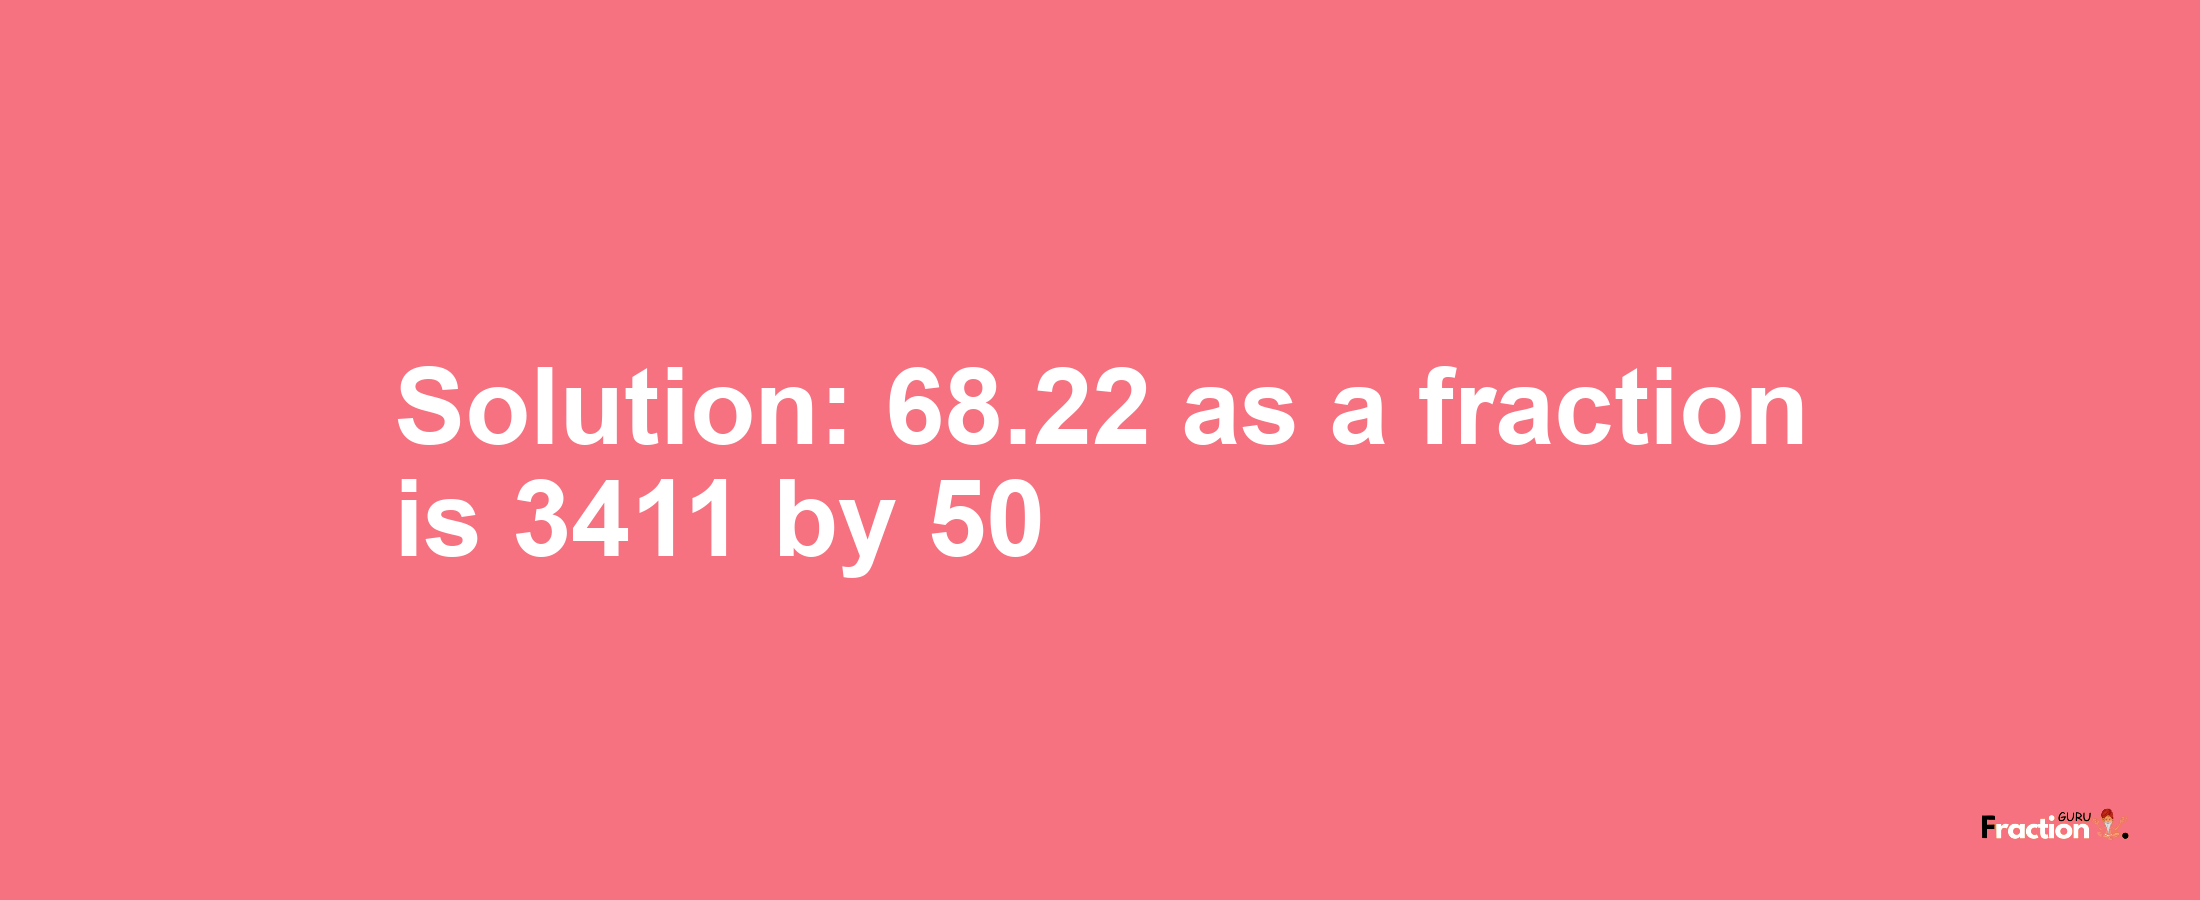 Solution:68.22 as a fraction is 3411/50